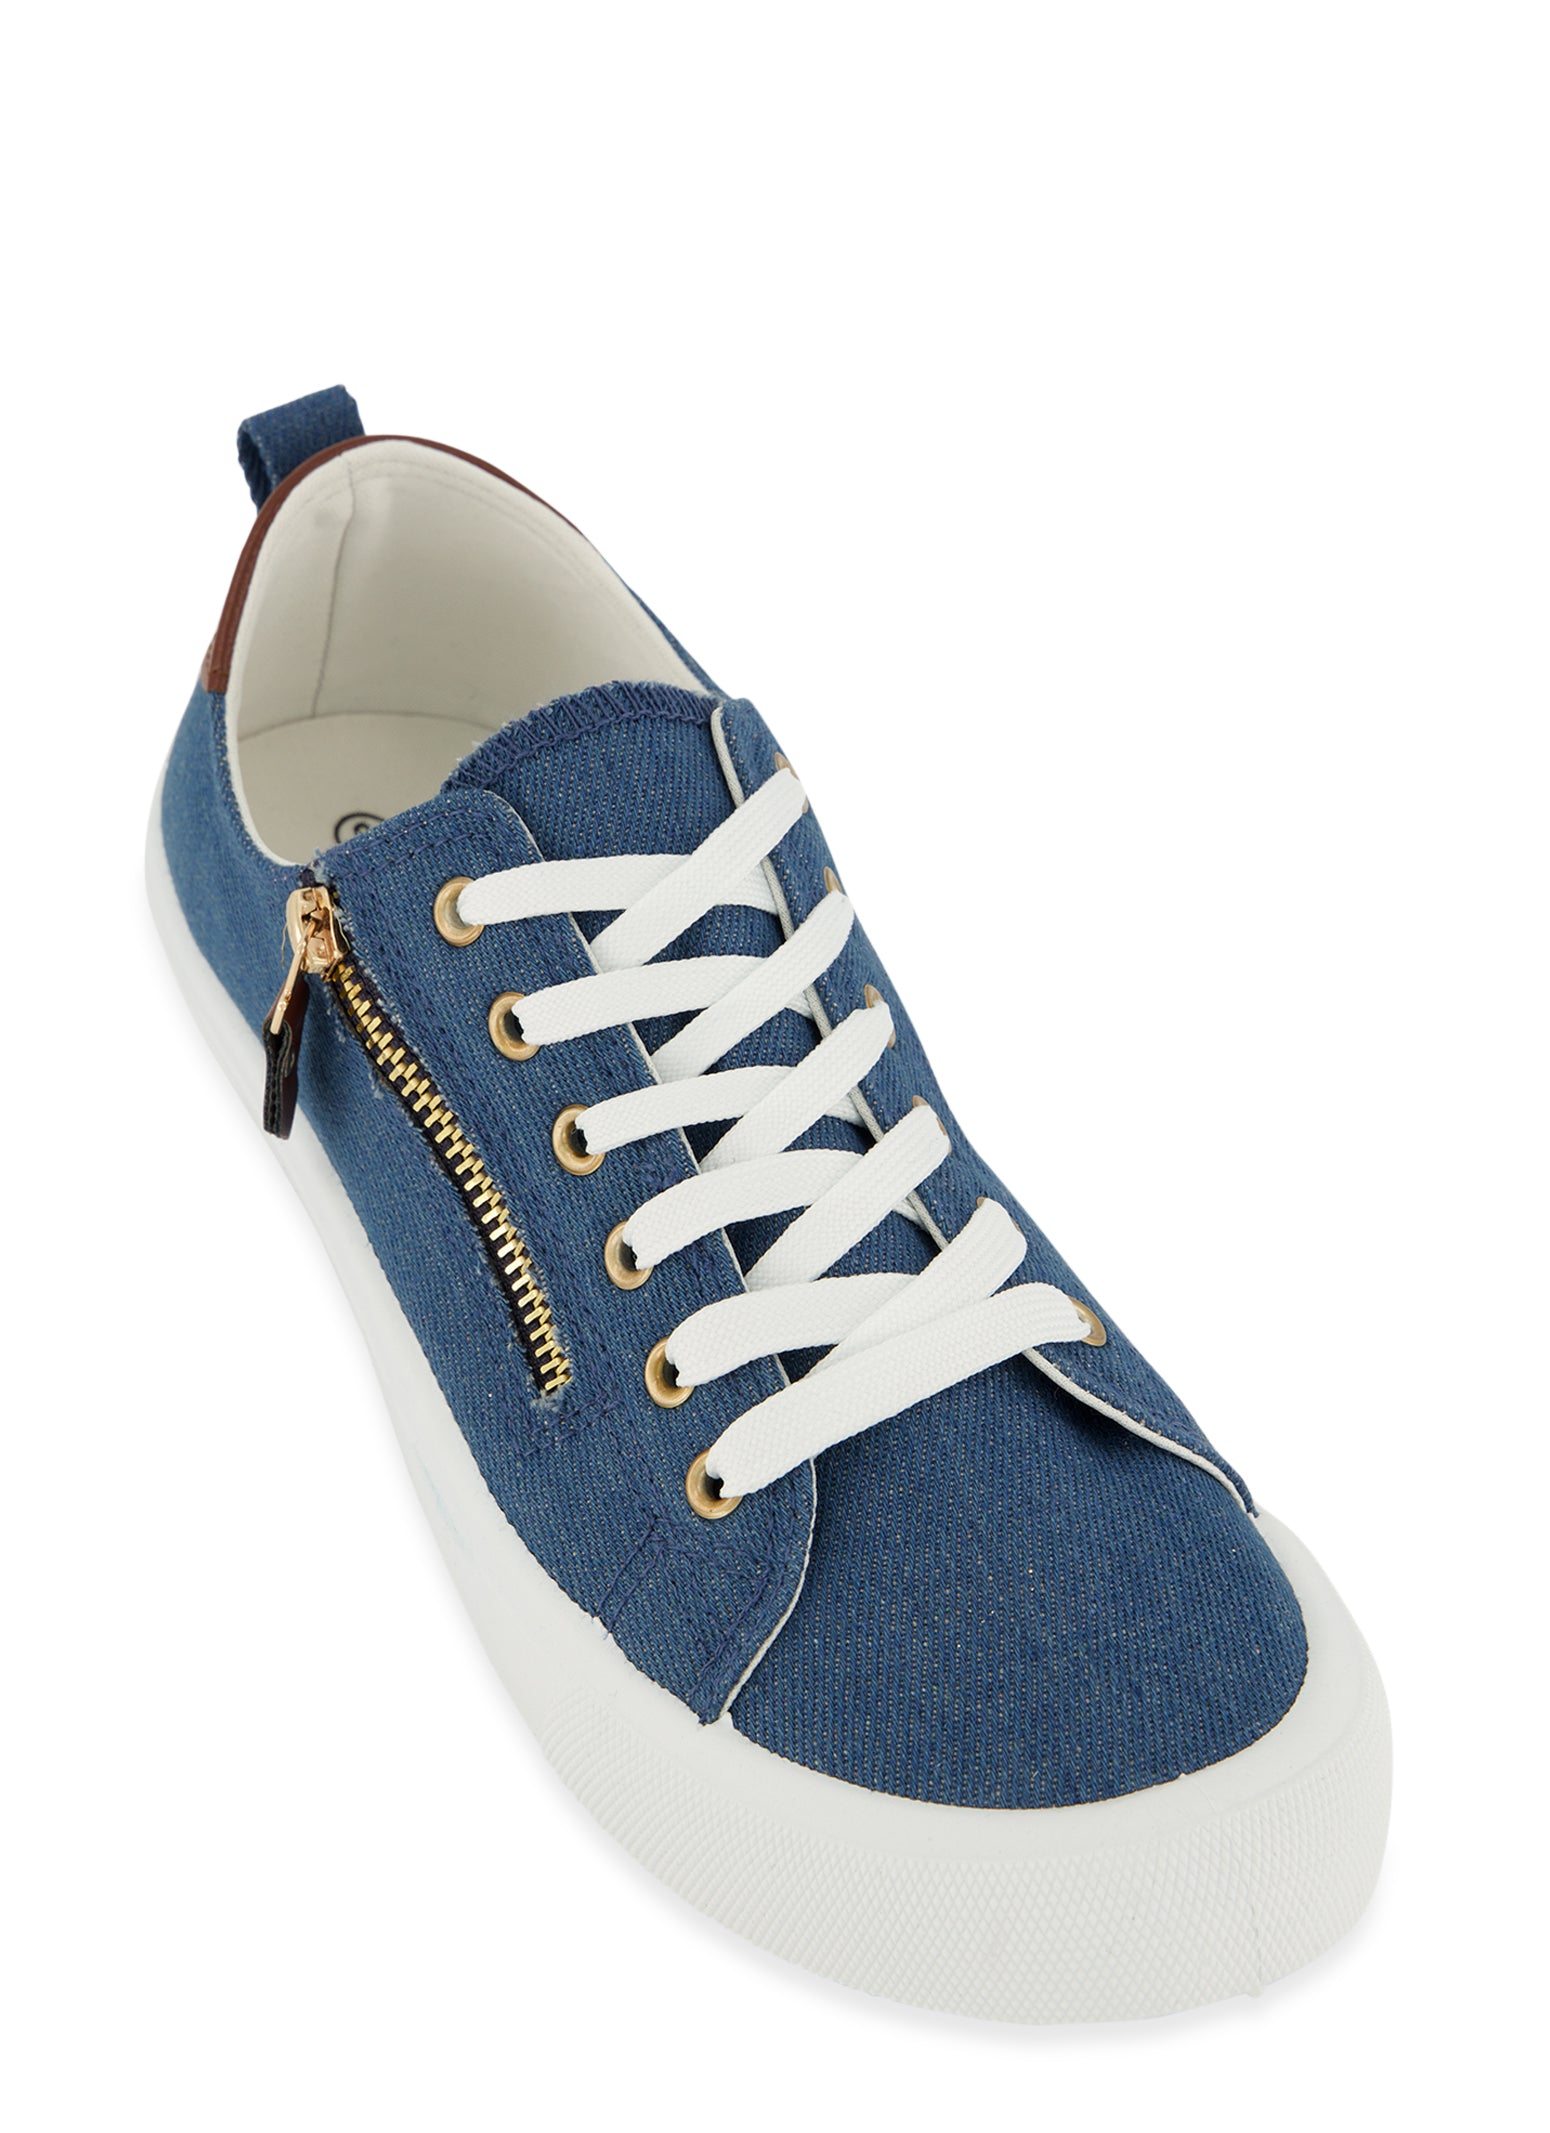 Lace Up Low Top Zipper Detail Sneakers